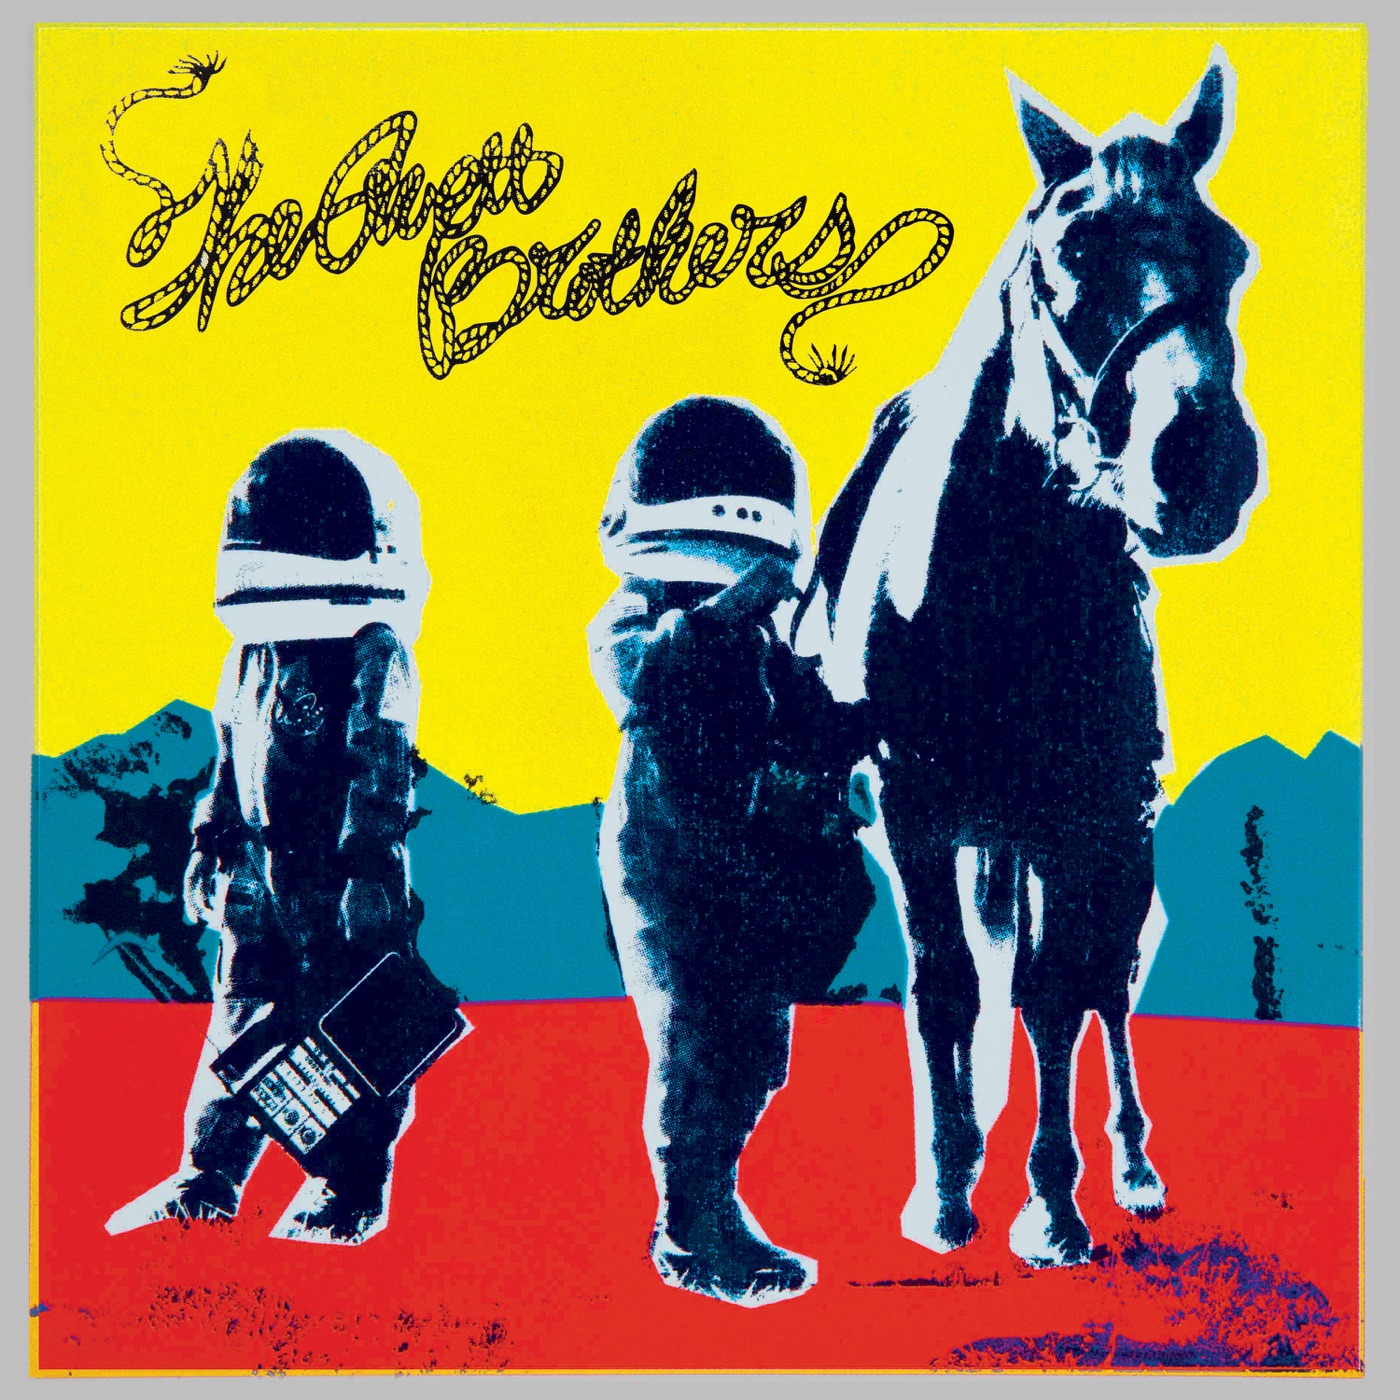 True Sadness by The Avett Brothers